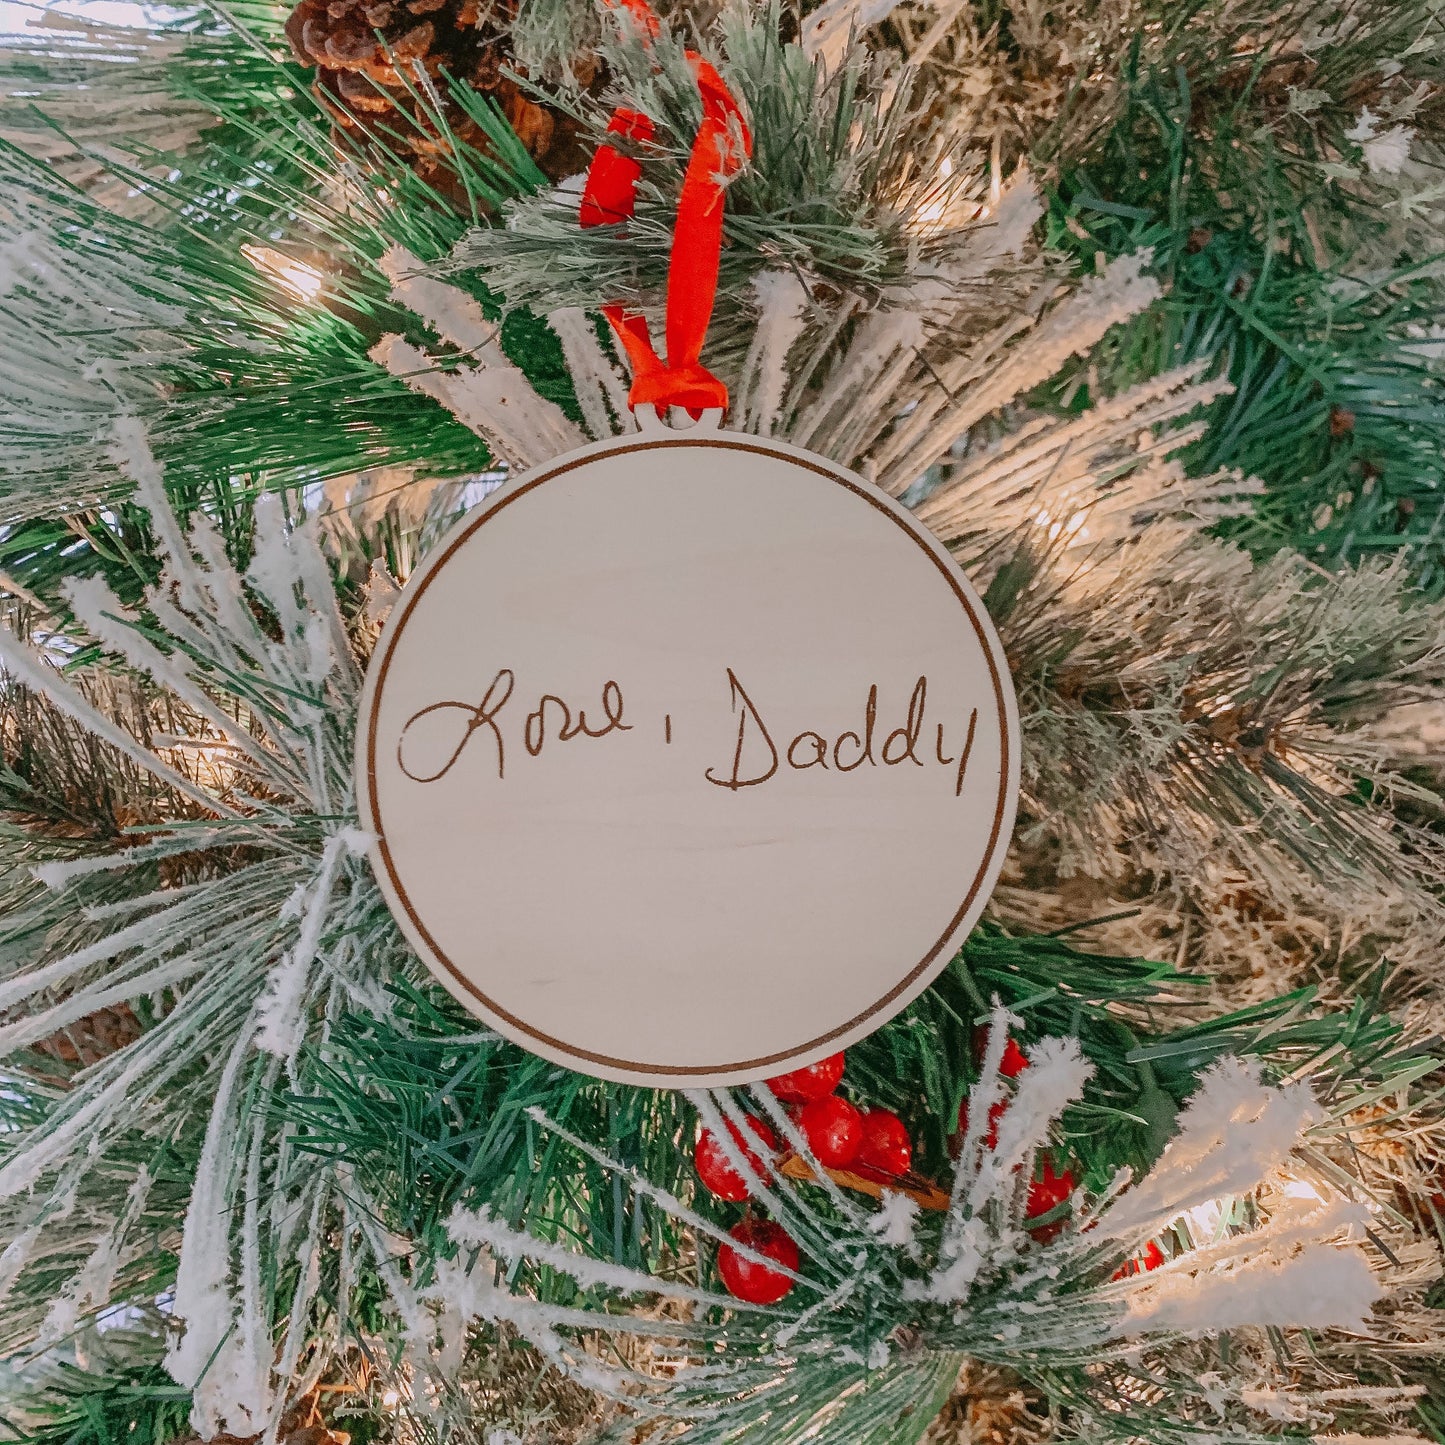 Wooden Tree Ornament Custom Engraved with Handwriting | Personalized Christmas Gift | Engraved Keepsake | Handwritten Ornament